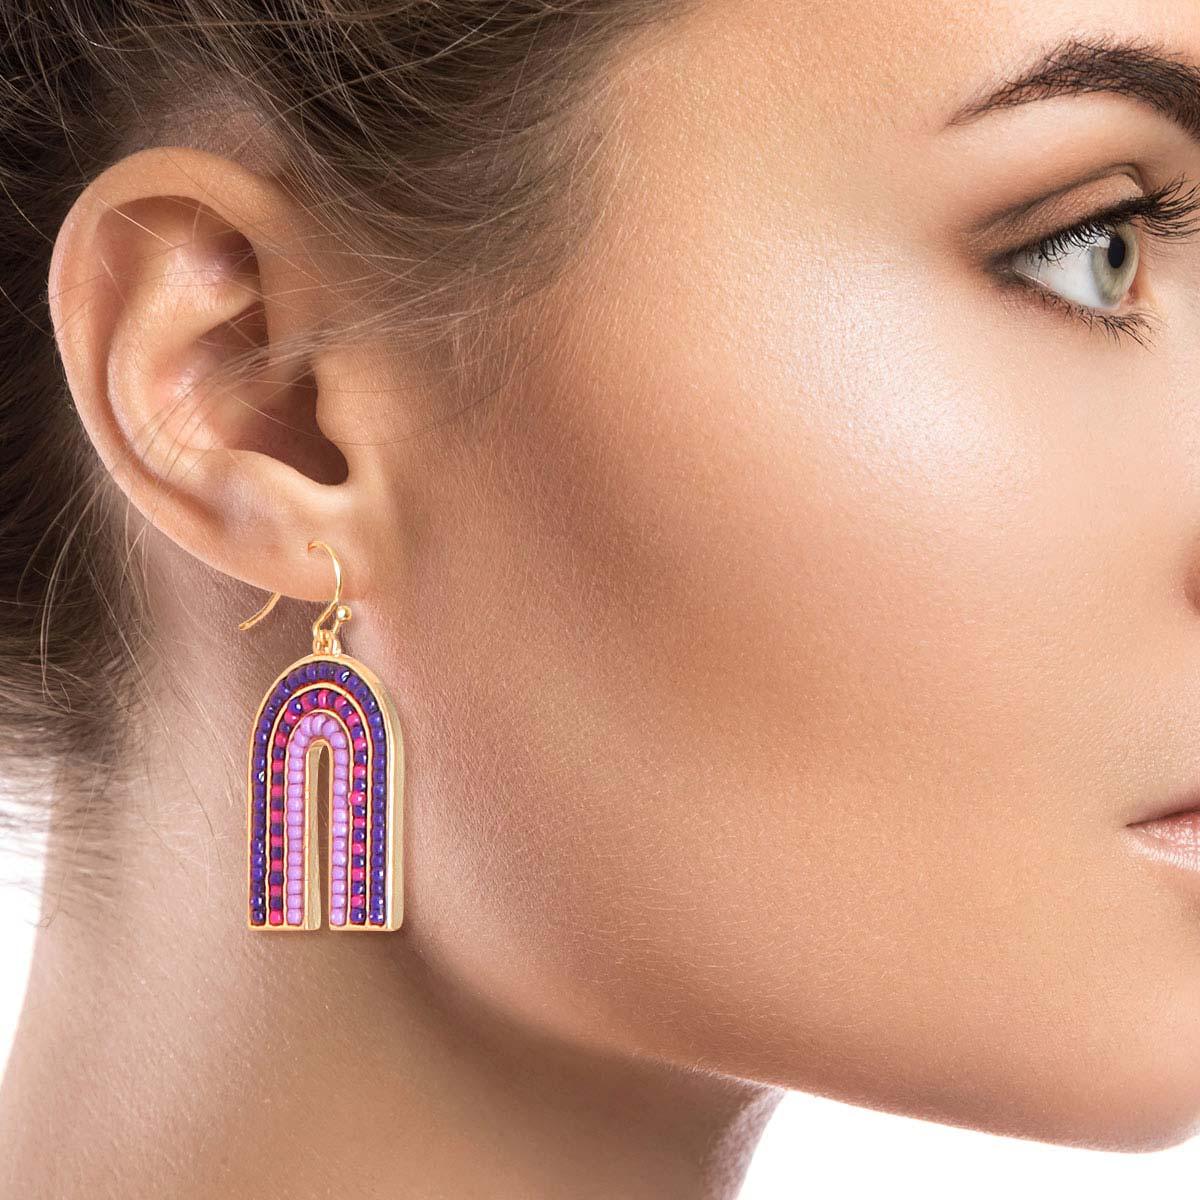 Get Noticed with Purple Seed Beaded Arch Earrings - Shop Now!